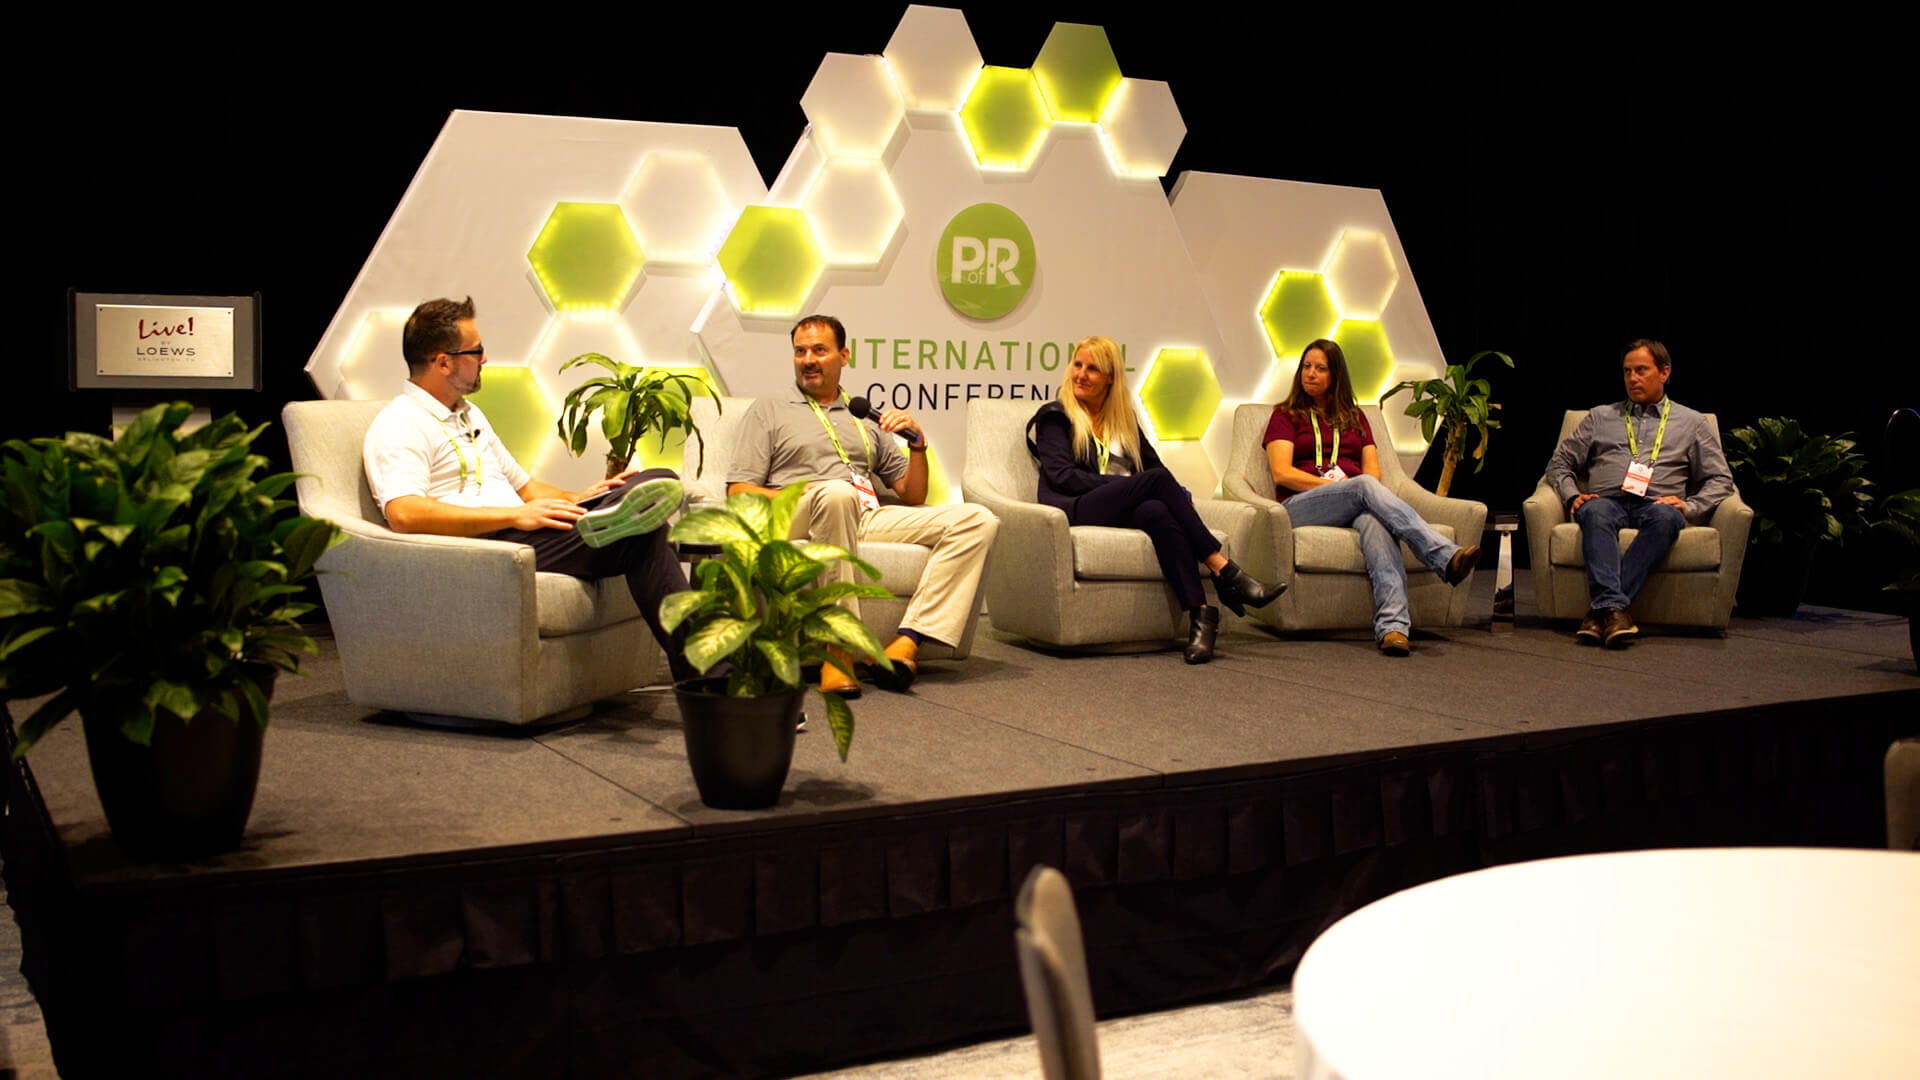 The PORIC22 Industry Panel onstage at the International Conference in 2022.